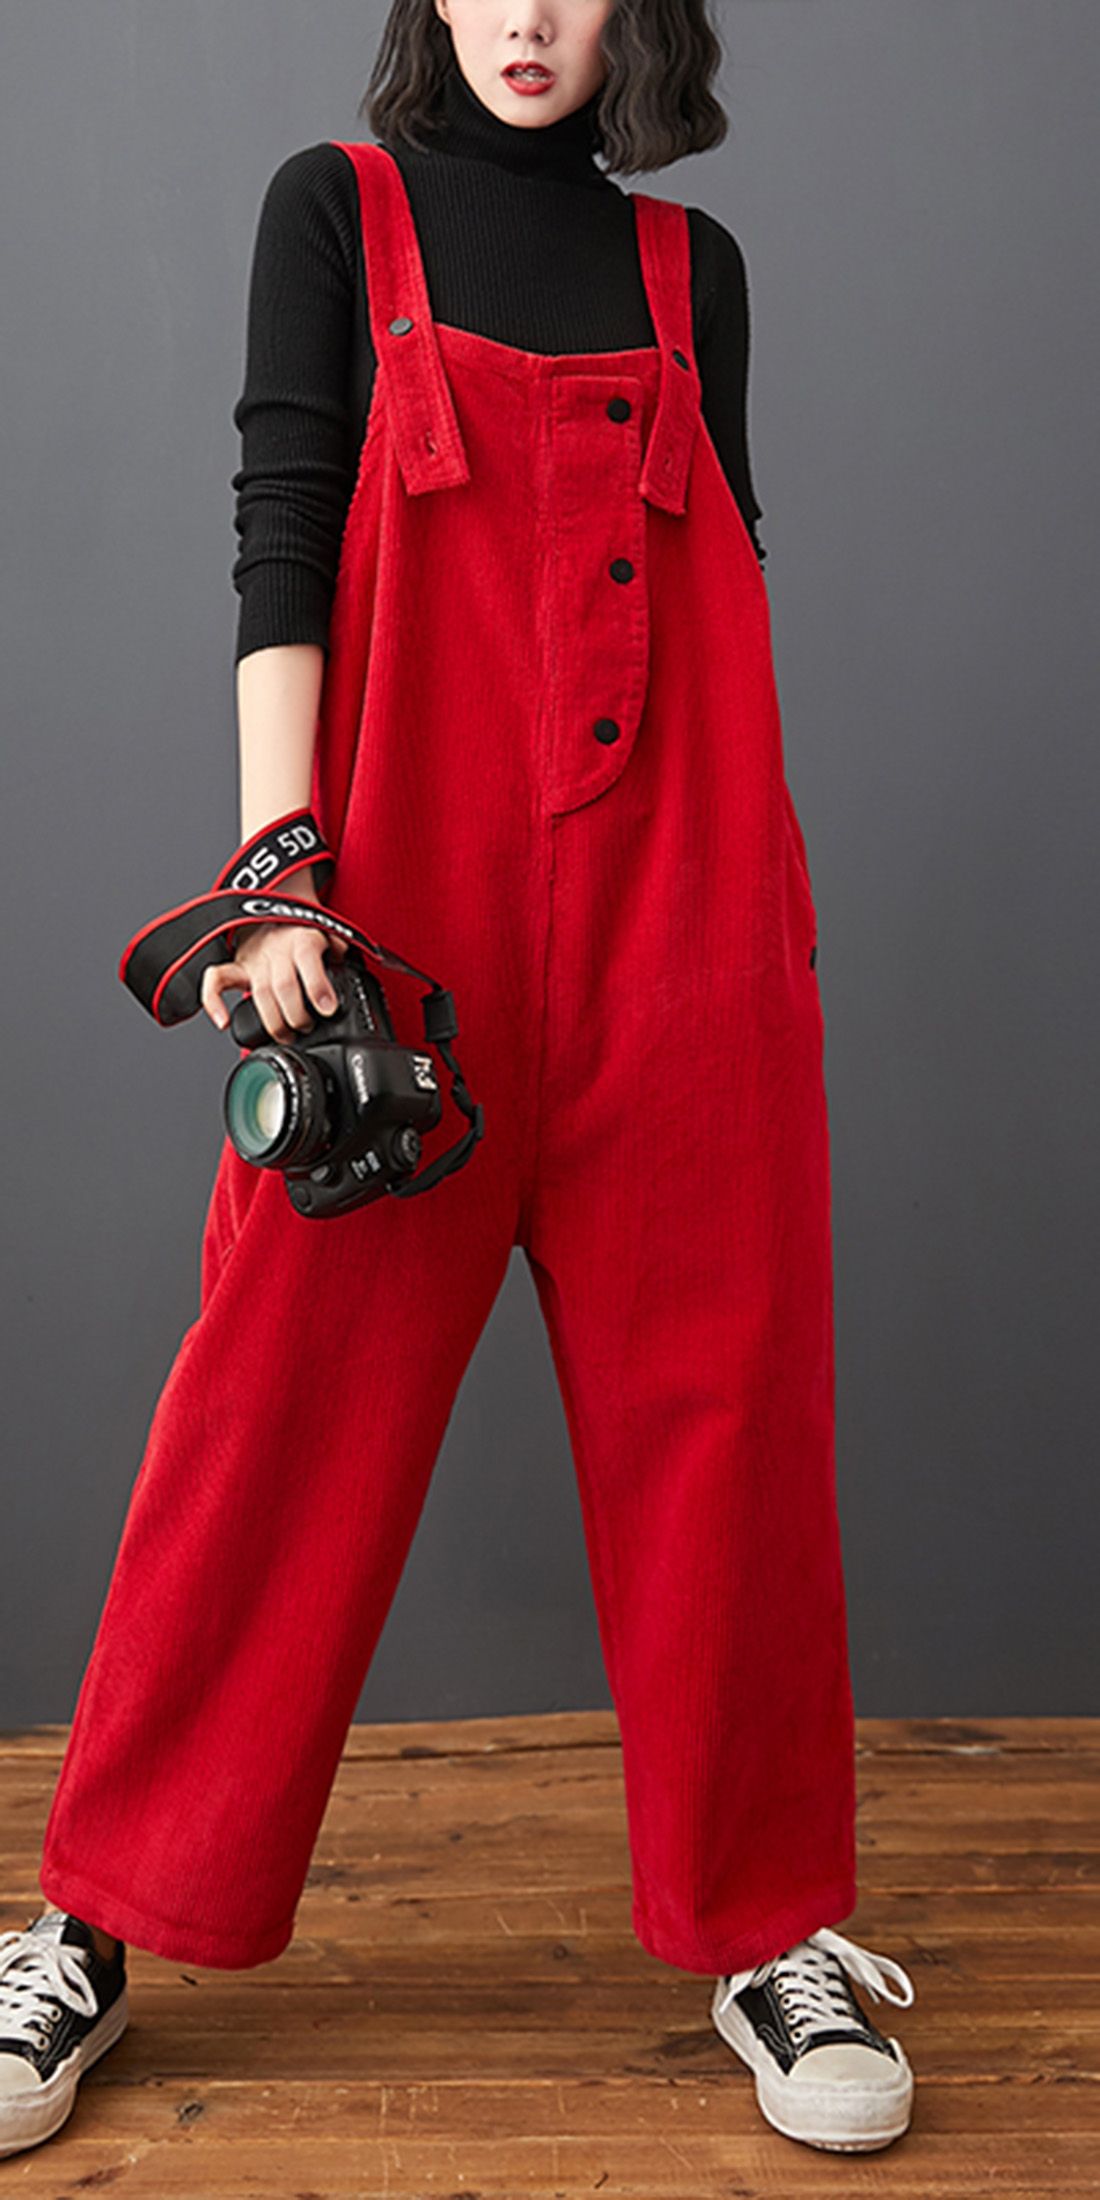 Red Pants Outfits for Women